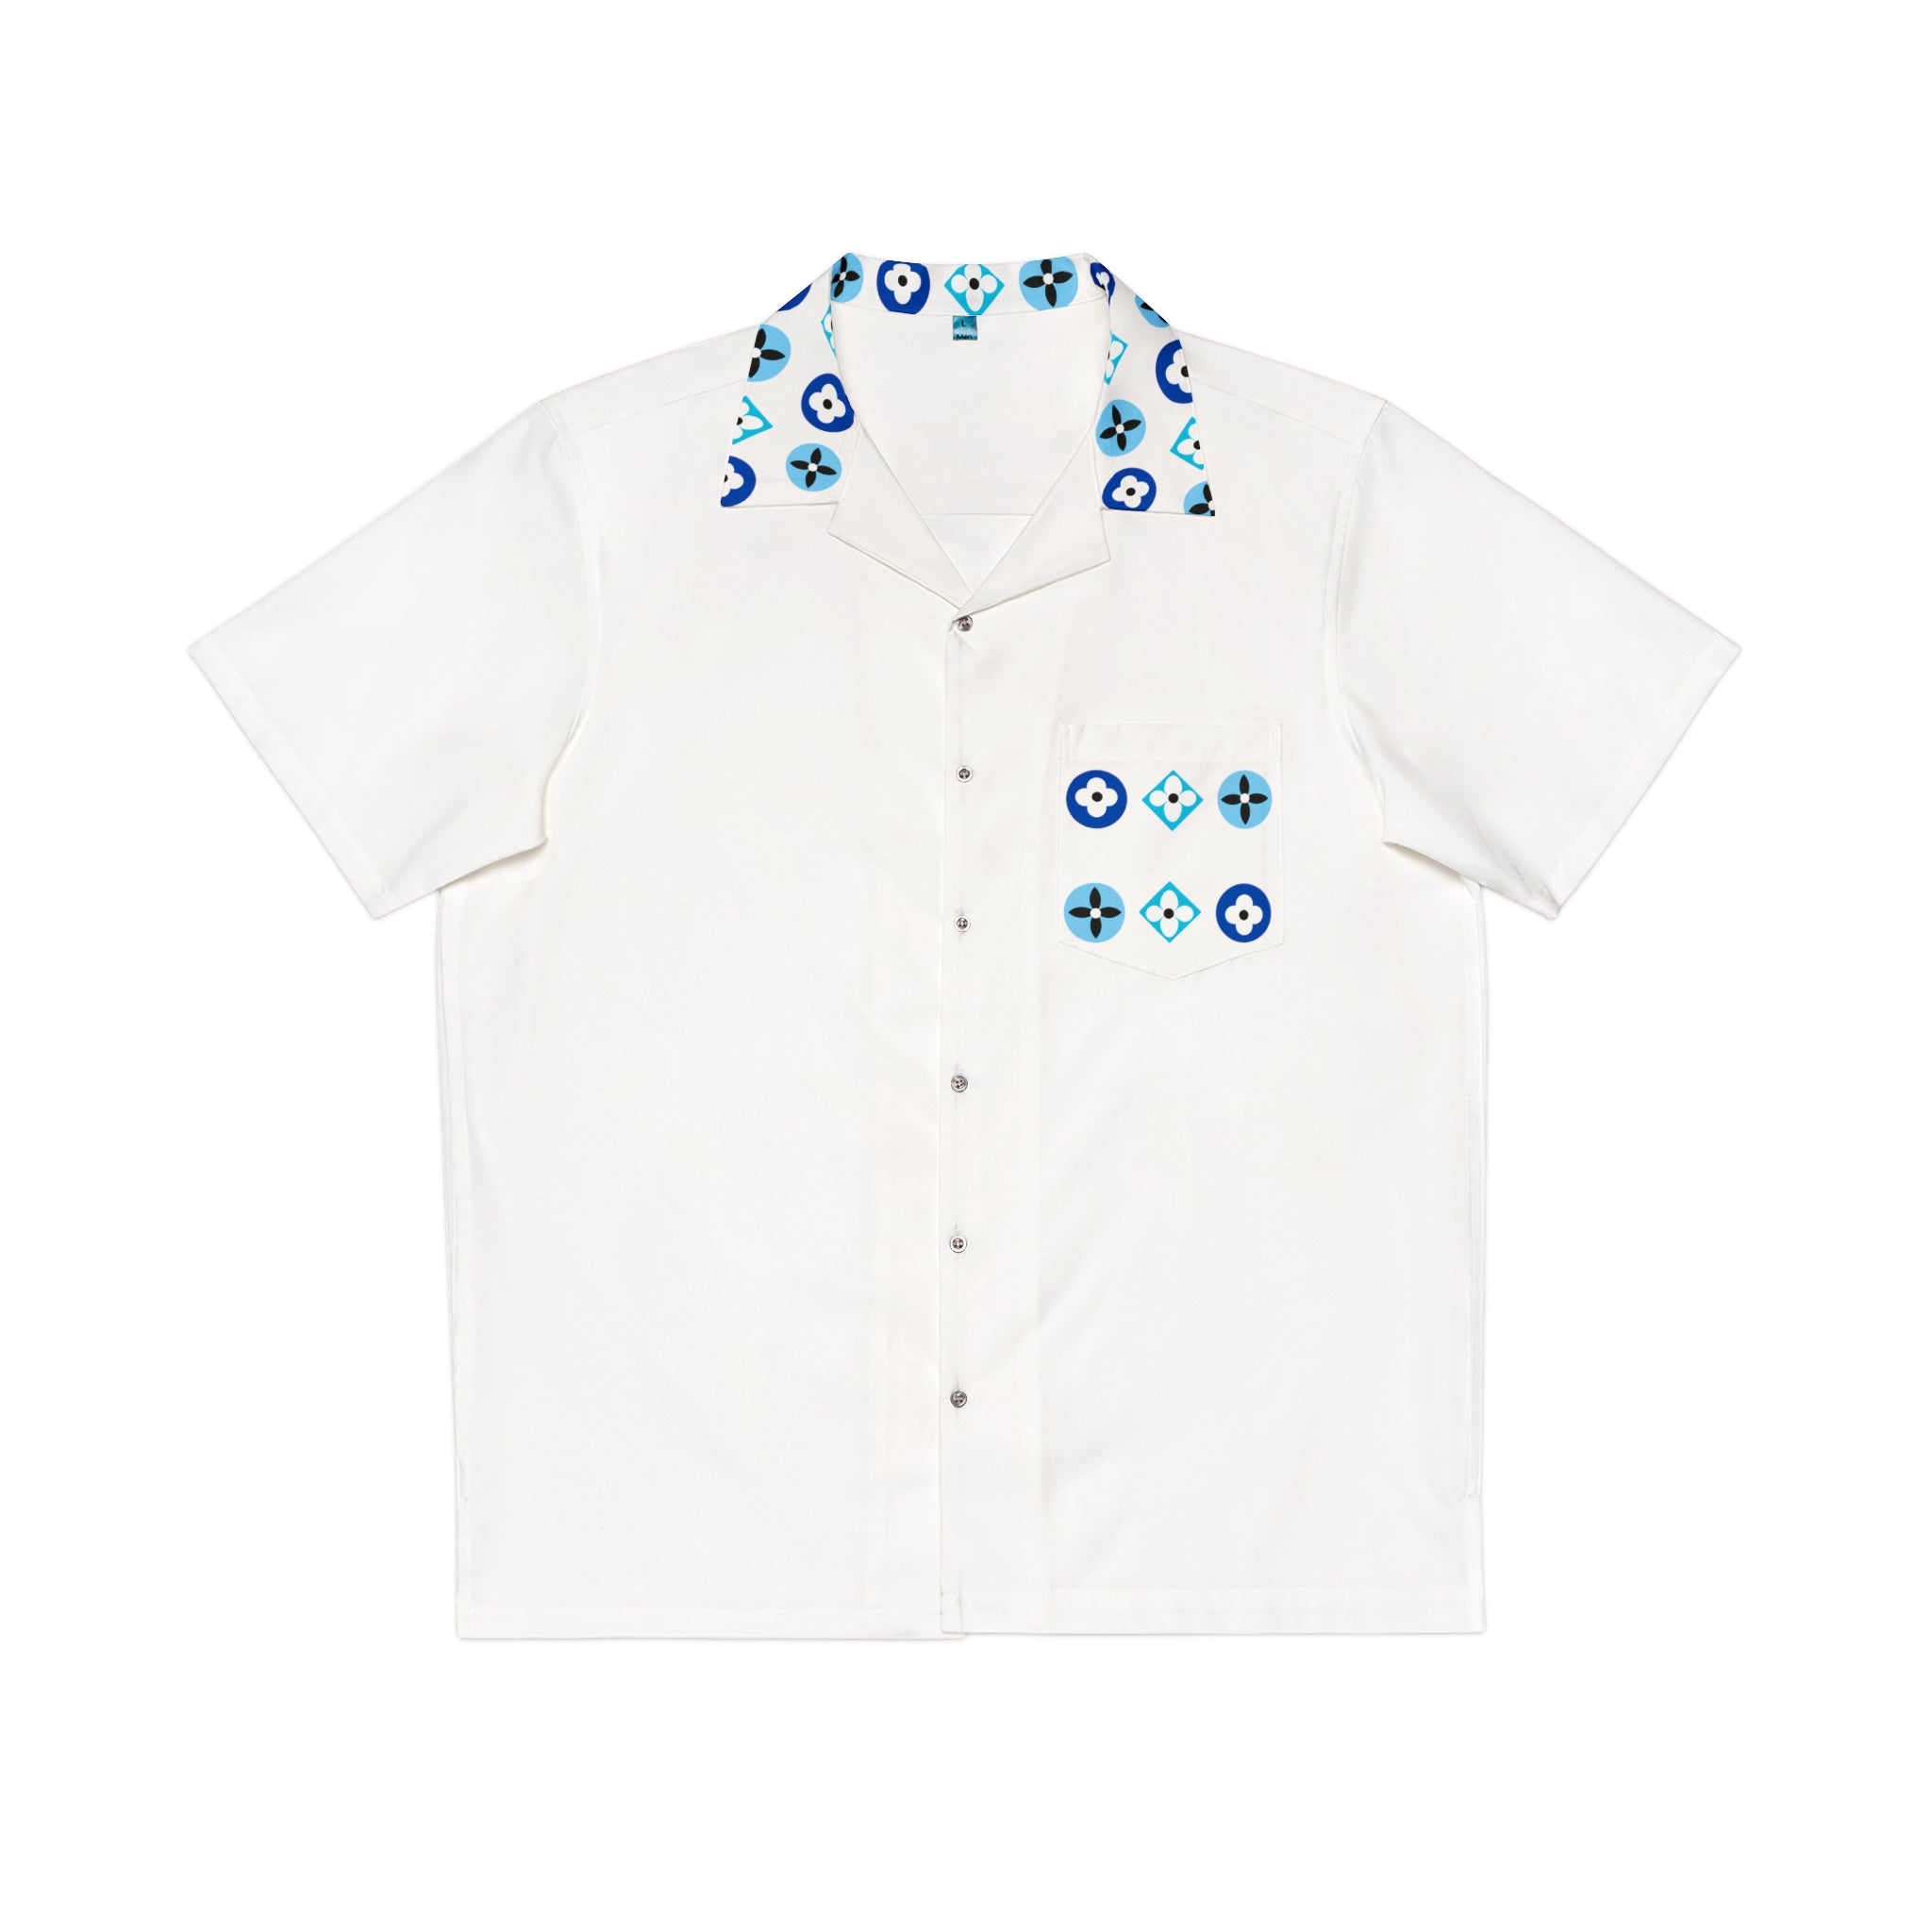 Groove Collection Trilogy of Icons Pocket Grid (Blues) White Unisex Gender Neutral Button Up Shirt, Hawaiian Shirt